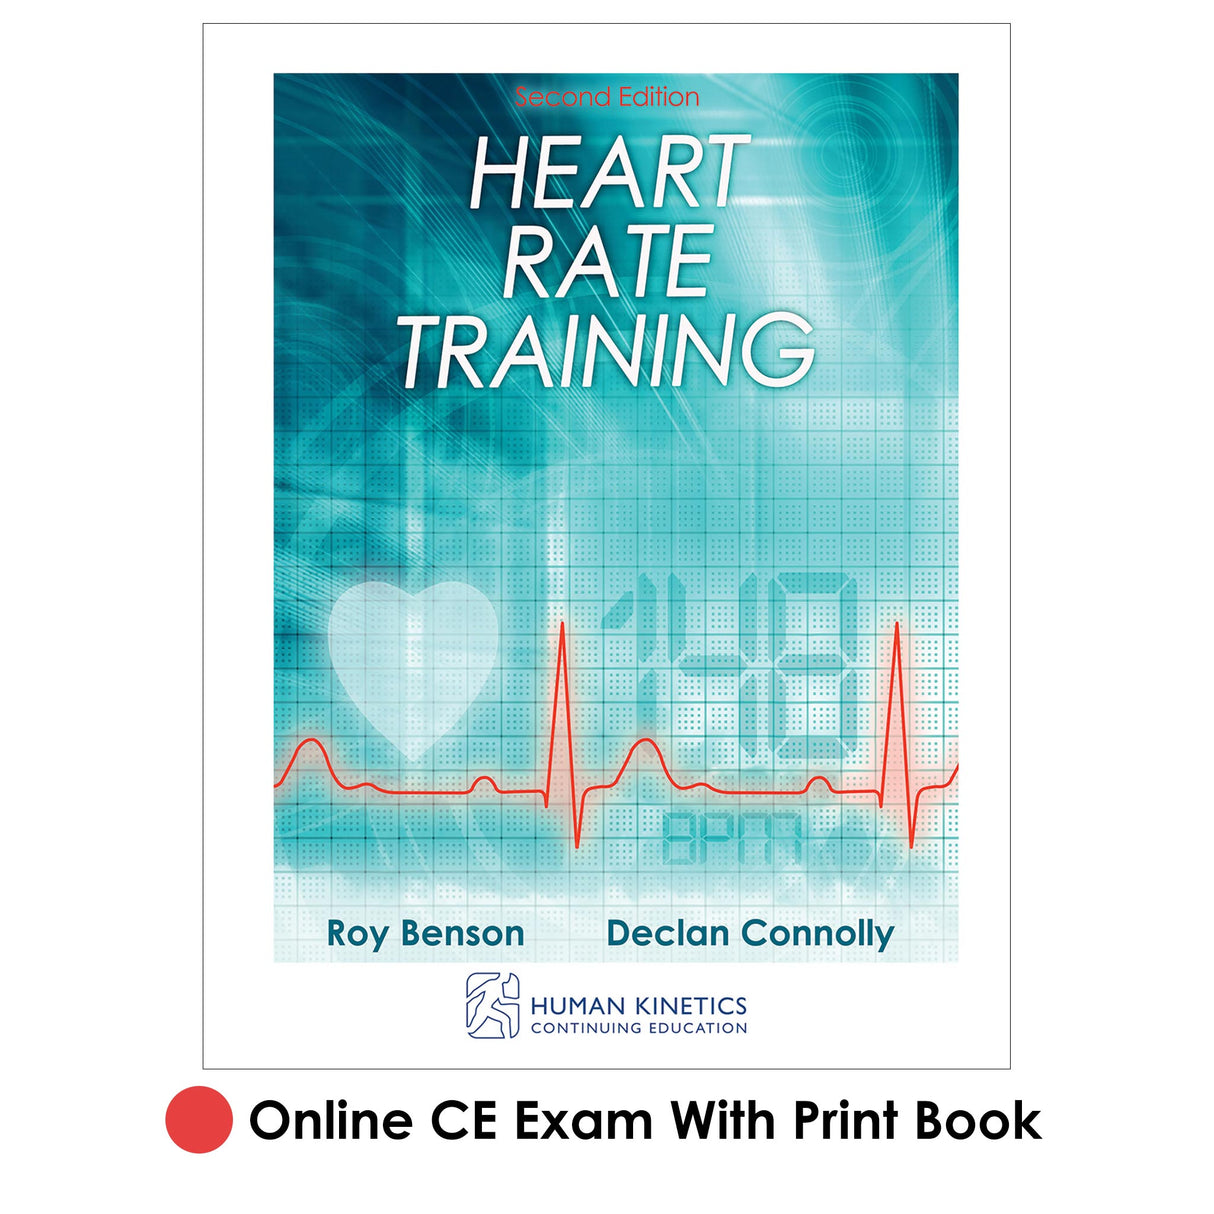 Heart Rate Training 2nd Edition Online CE Exam With Print Book